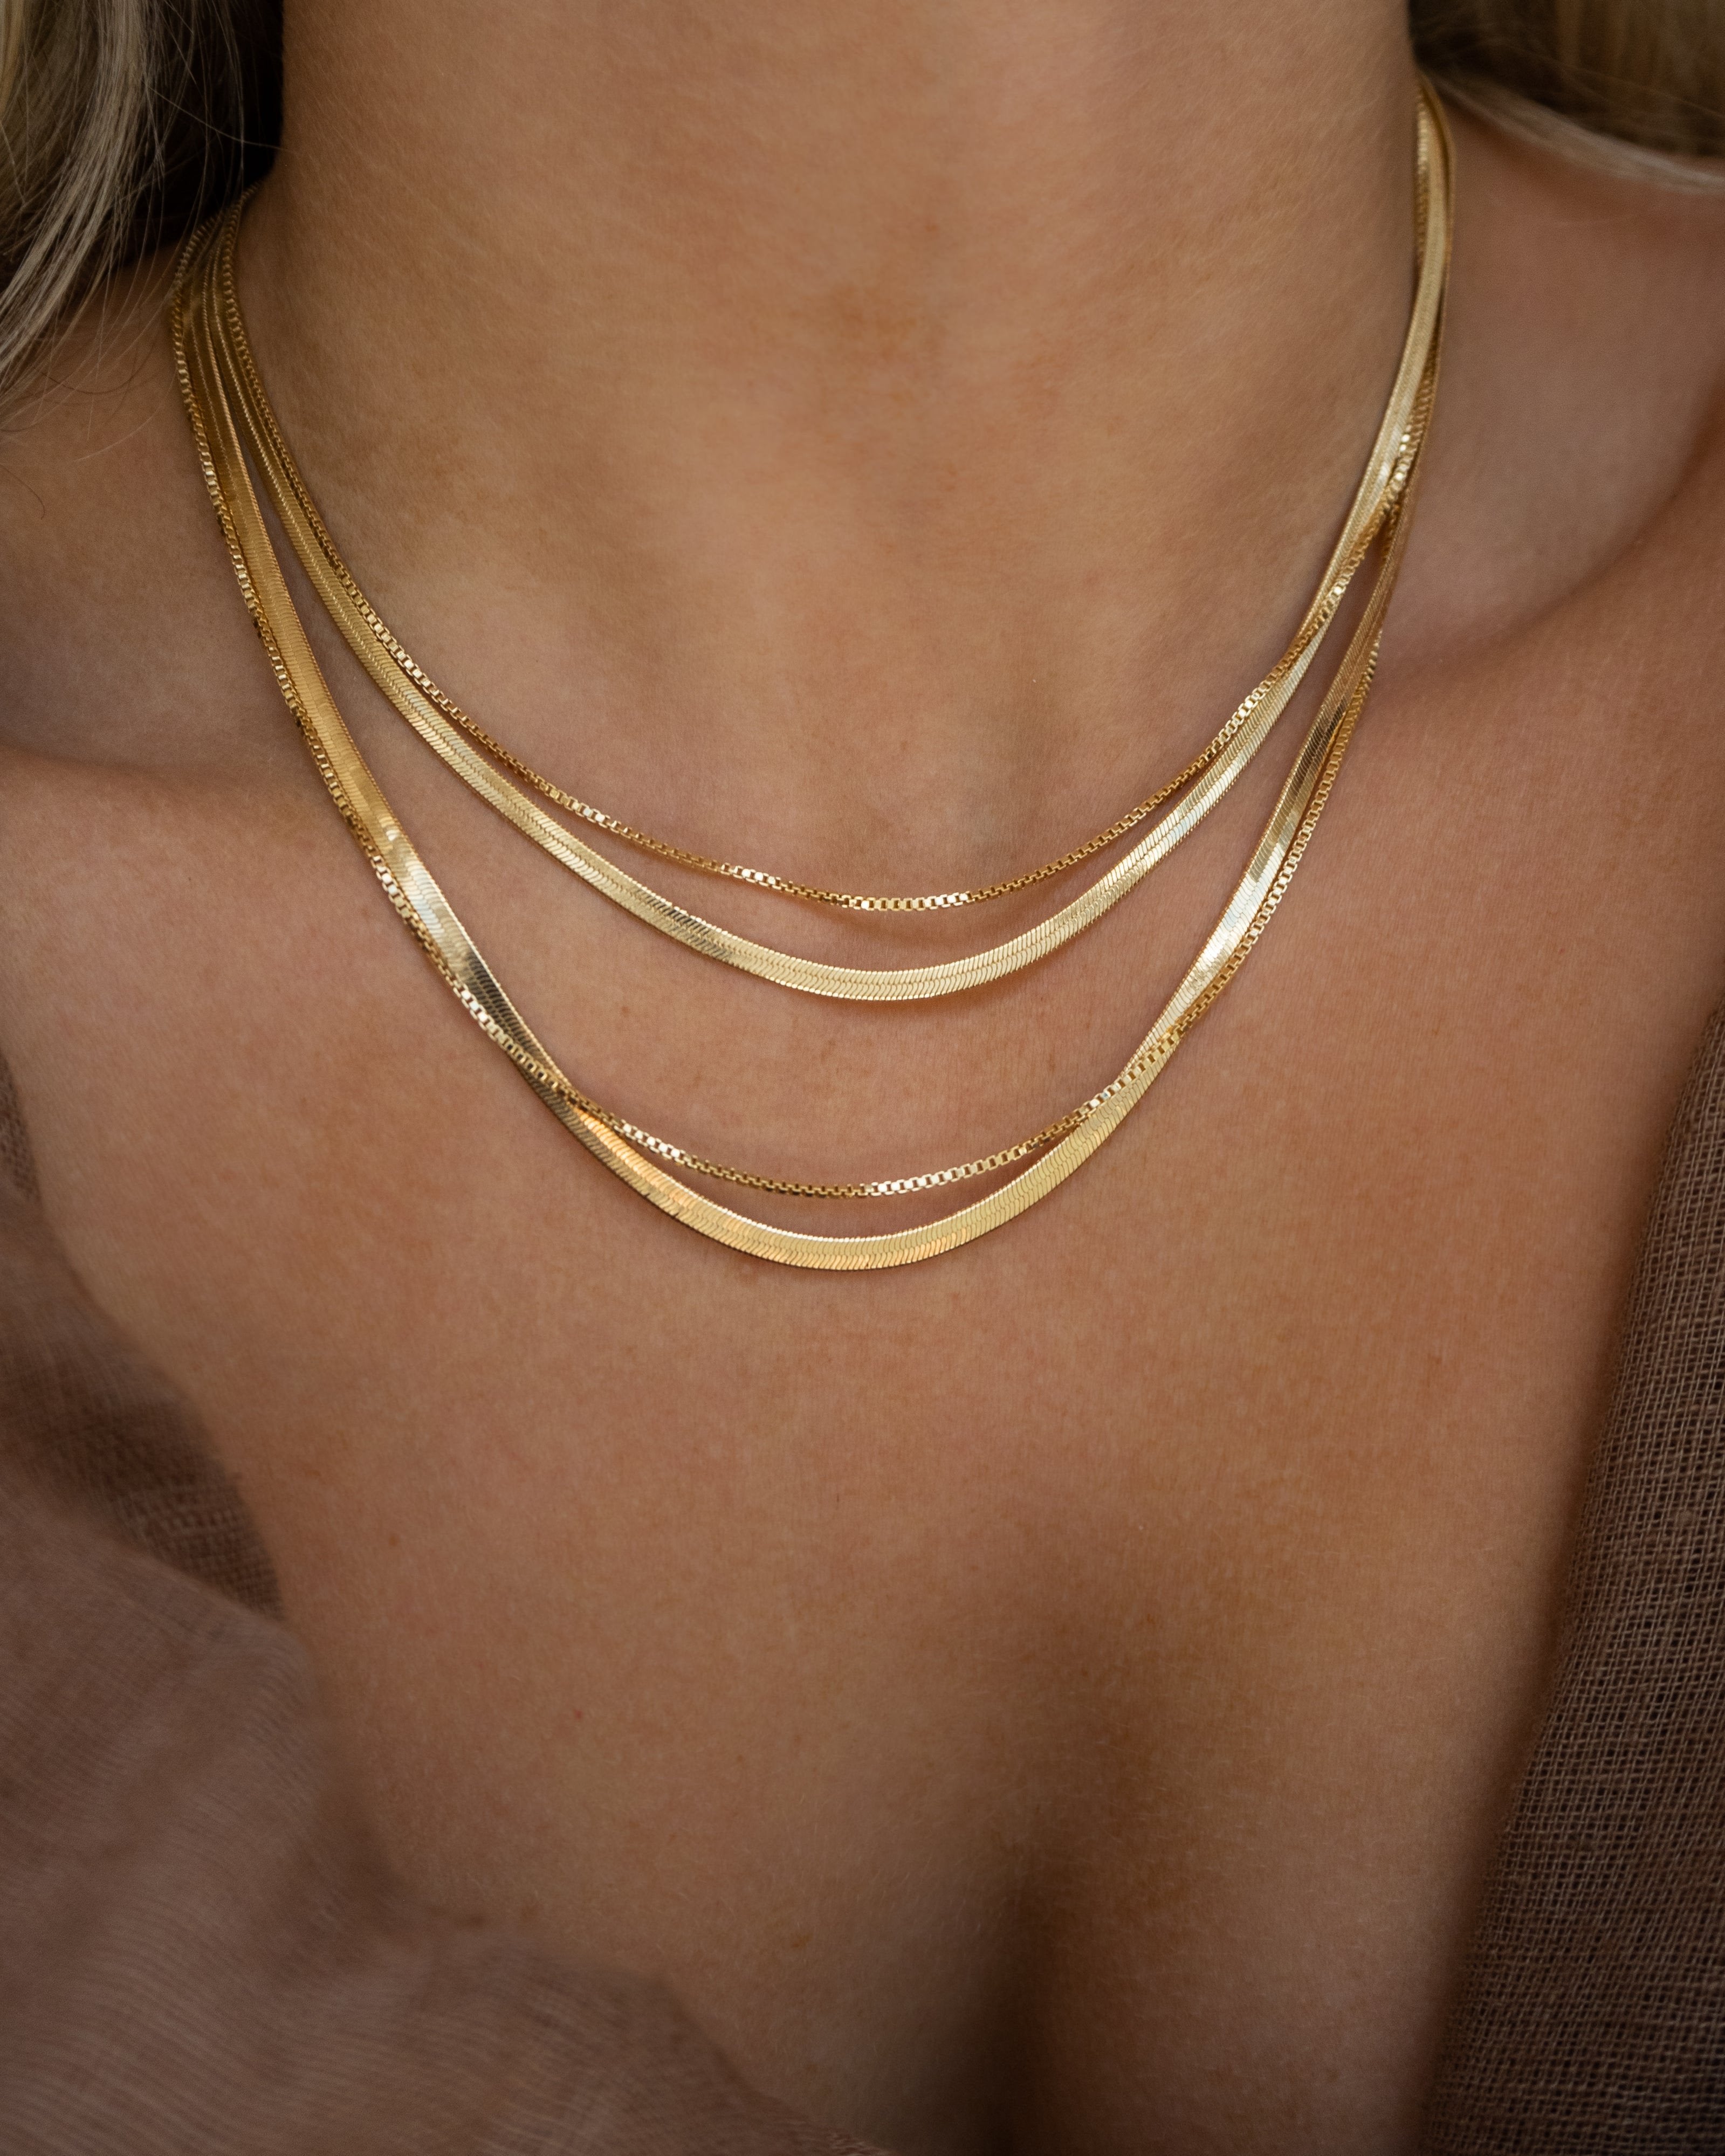 Dainty layering thin box chain necklace 14k gold filled. box chain, dainty chain, simple chain, gold chain, minimalist chain, layering chain, layering necklace,  gold chain, gold filled chain, minimalist jewelry, herringbone chain, herringbone necklace, delicate chain, delicate necklace, dainty box chain